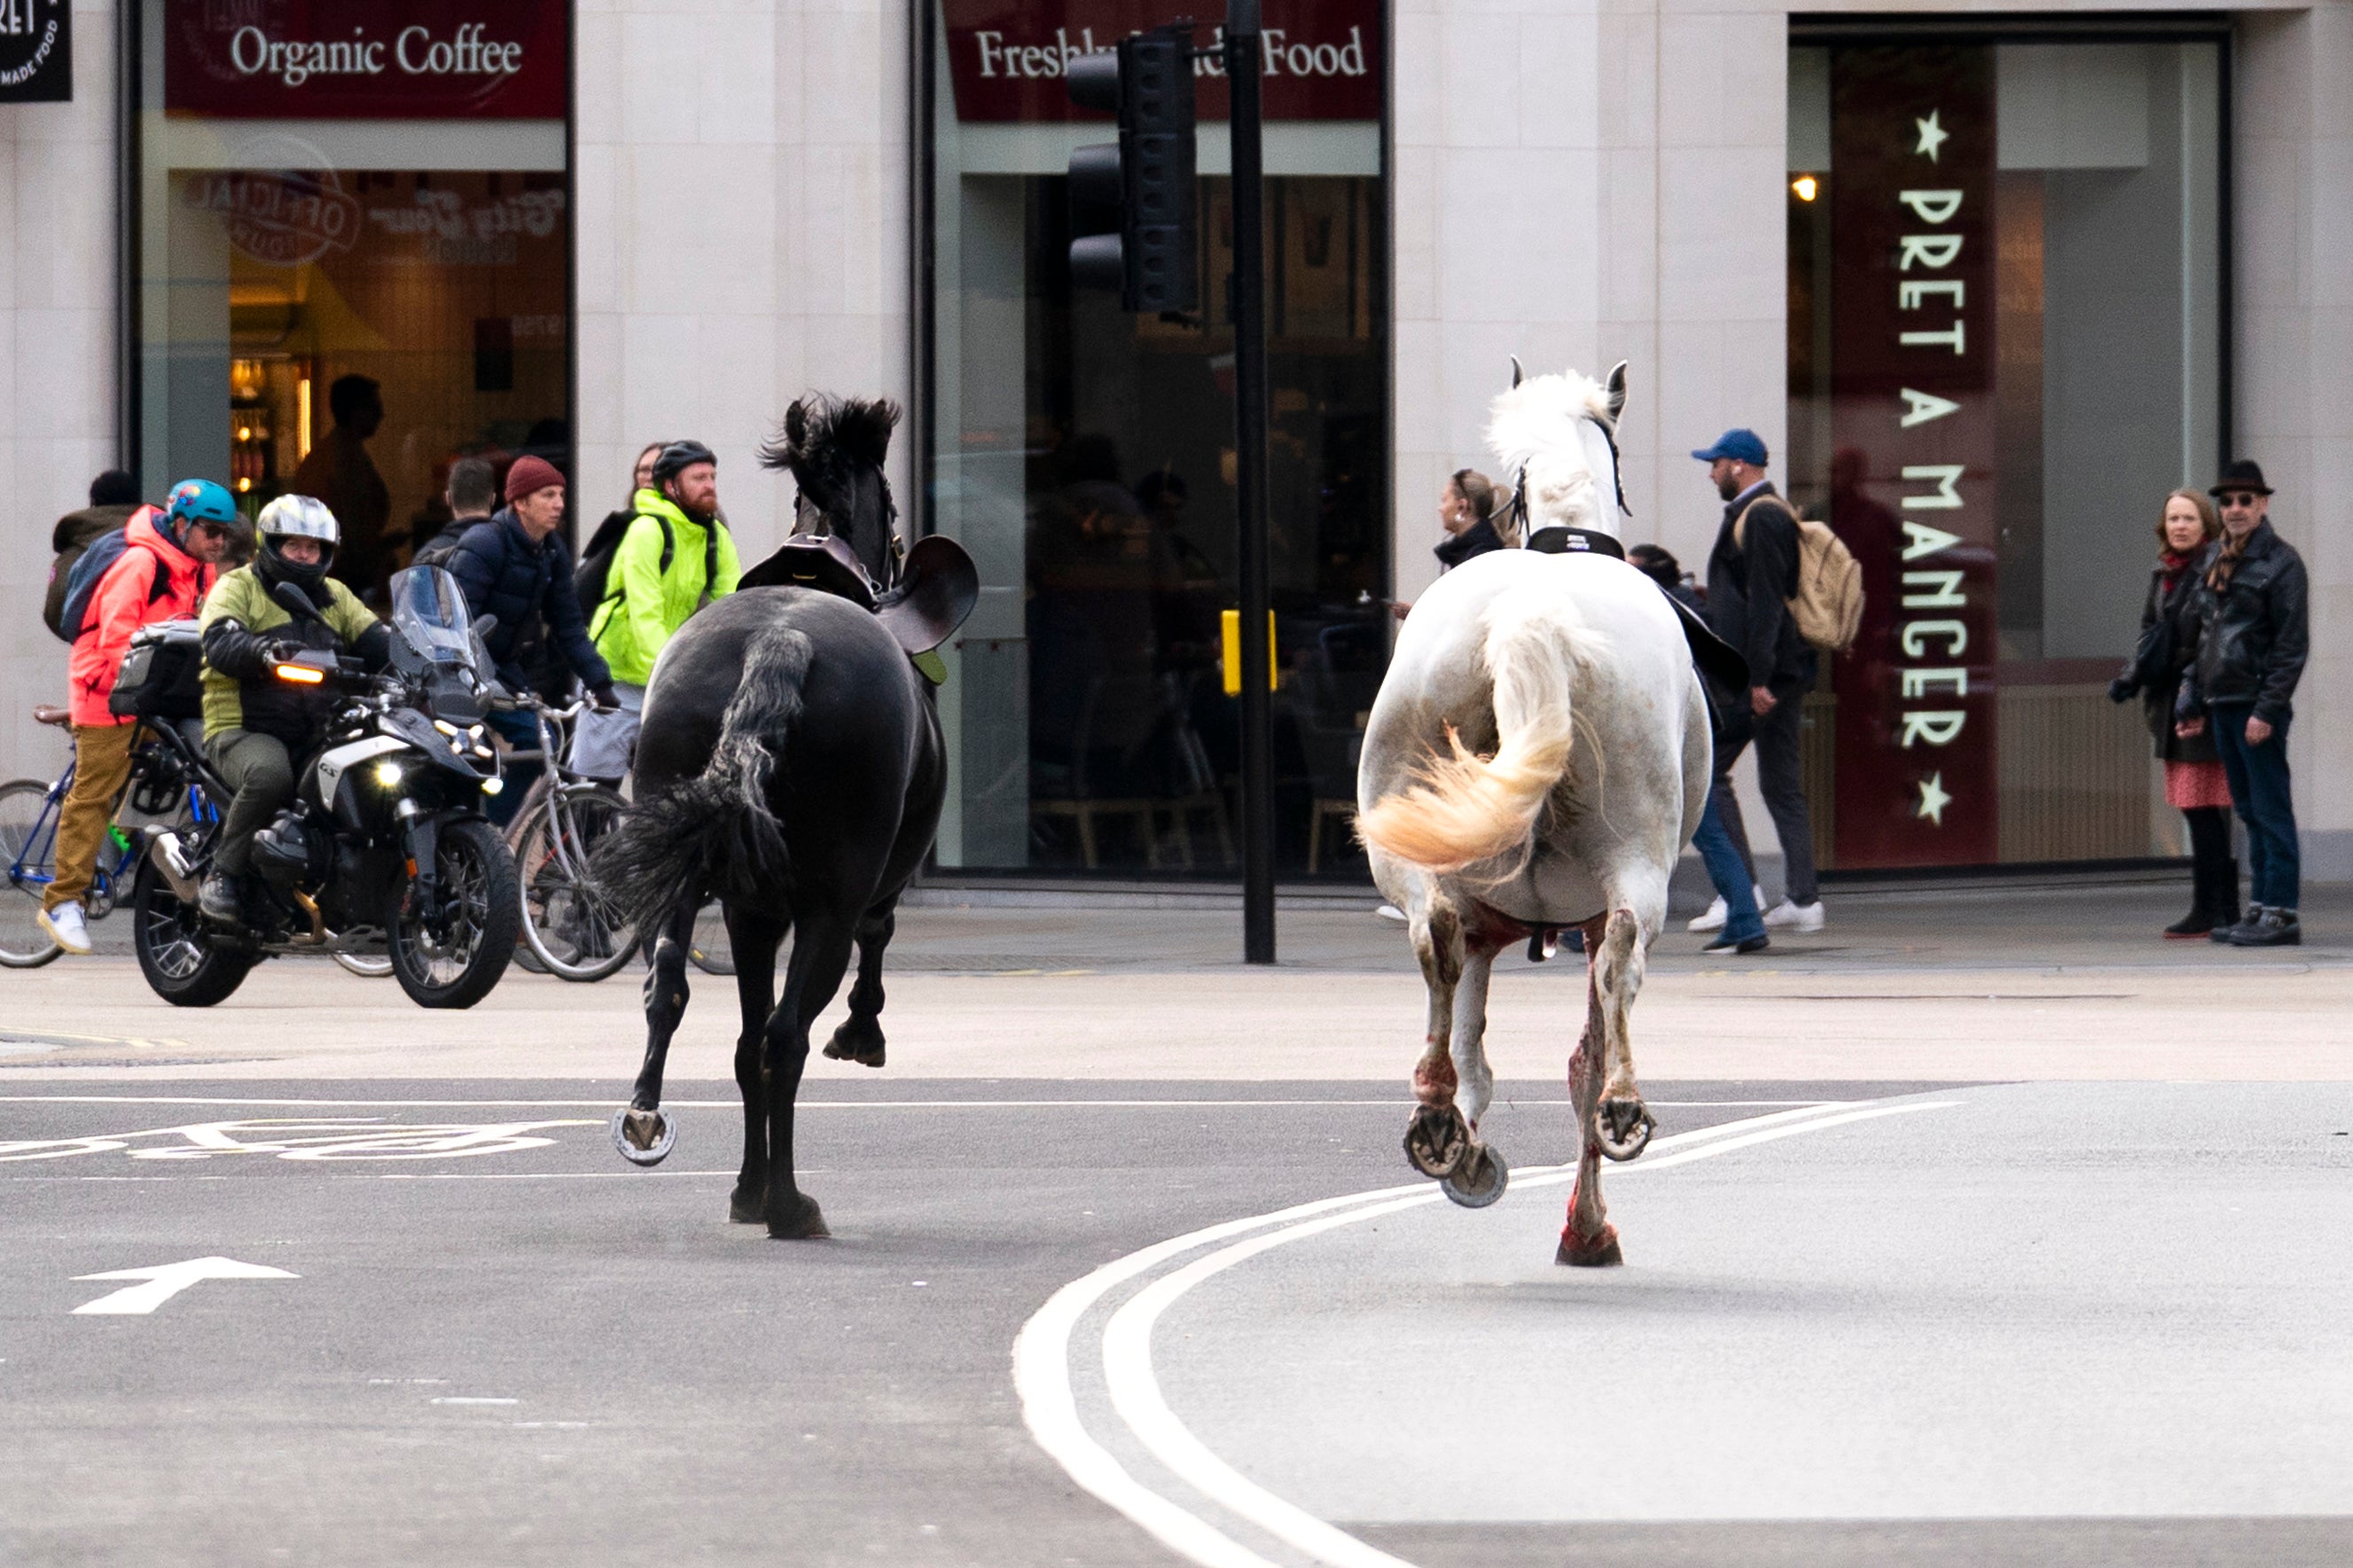 Two horses seen dashing through the streets of central London